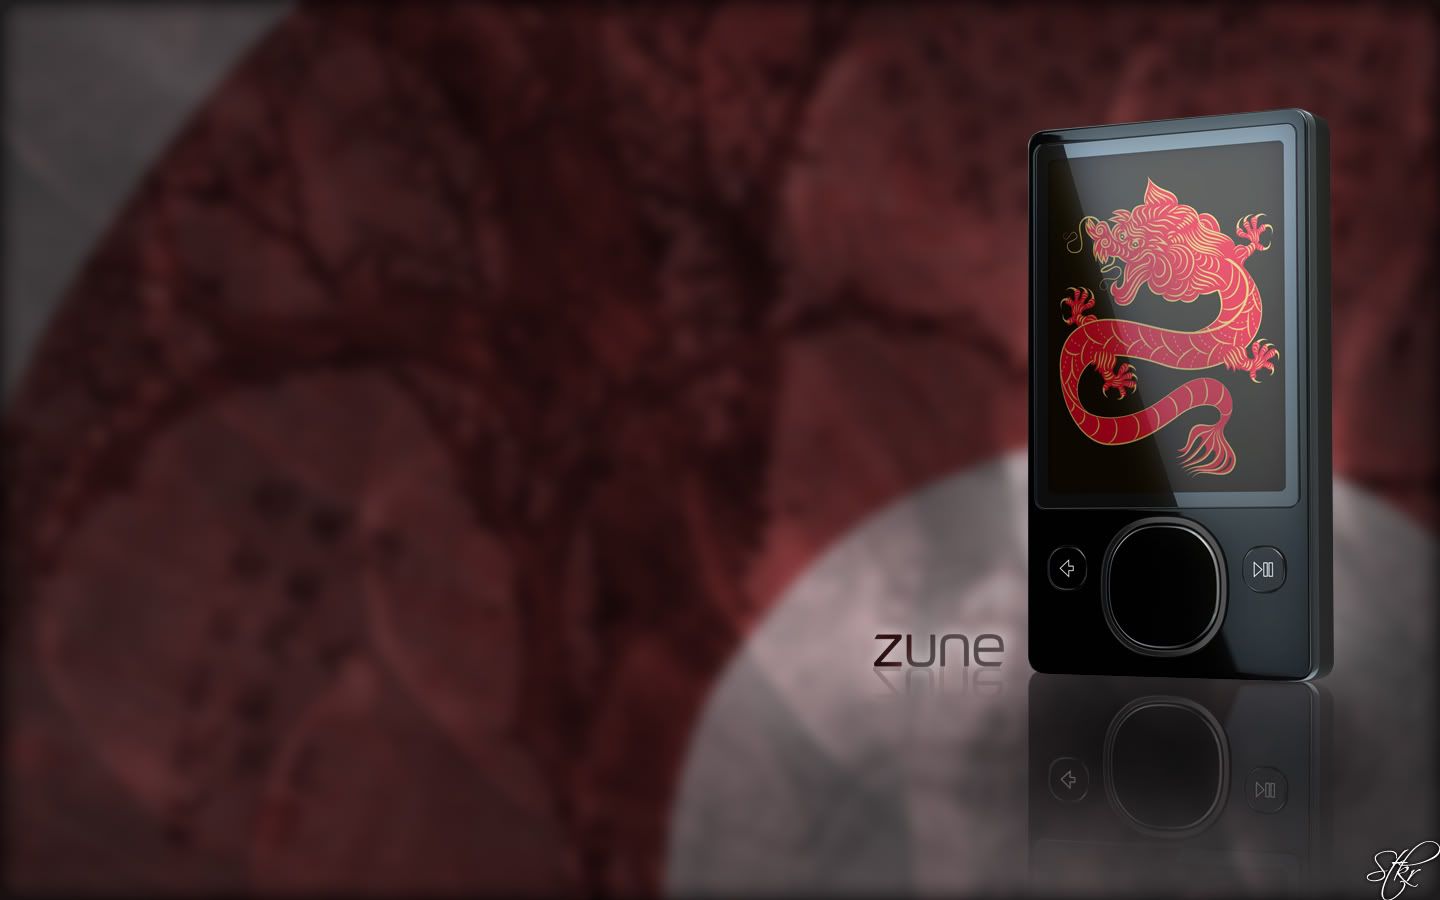  and realized that I've only made one wallpaper for the Zune 120 owners.